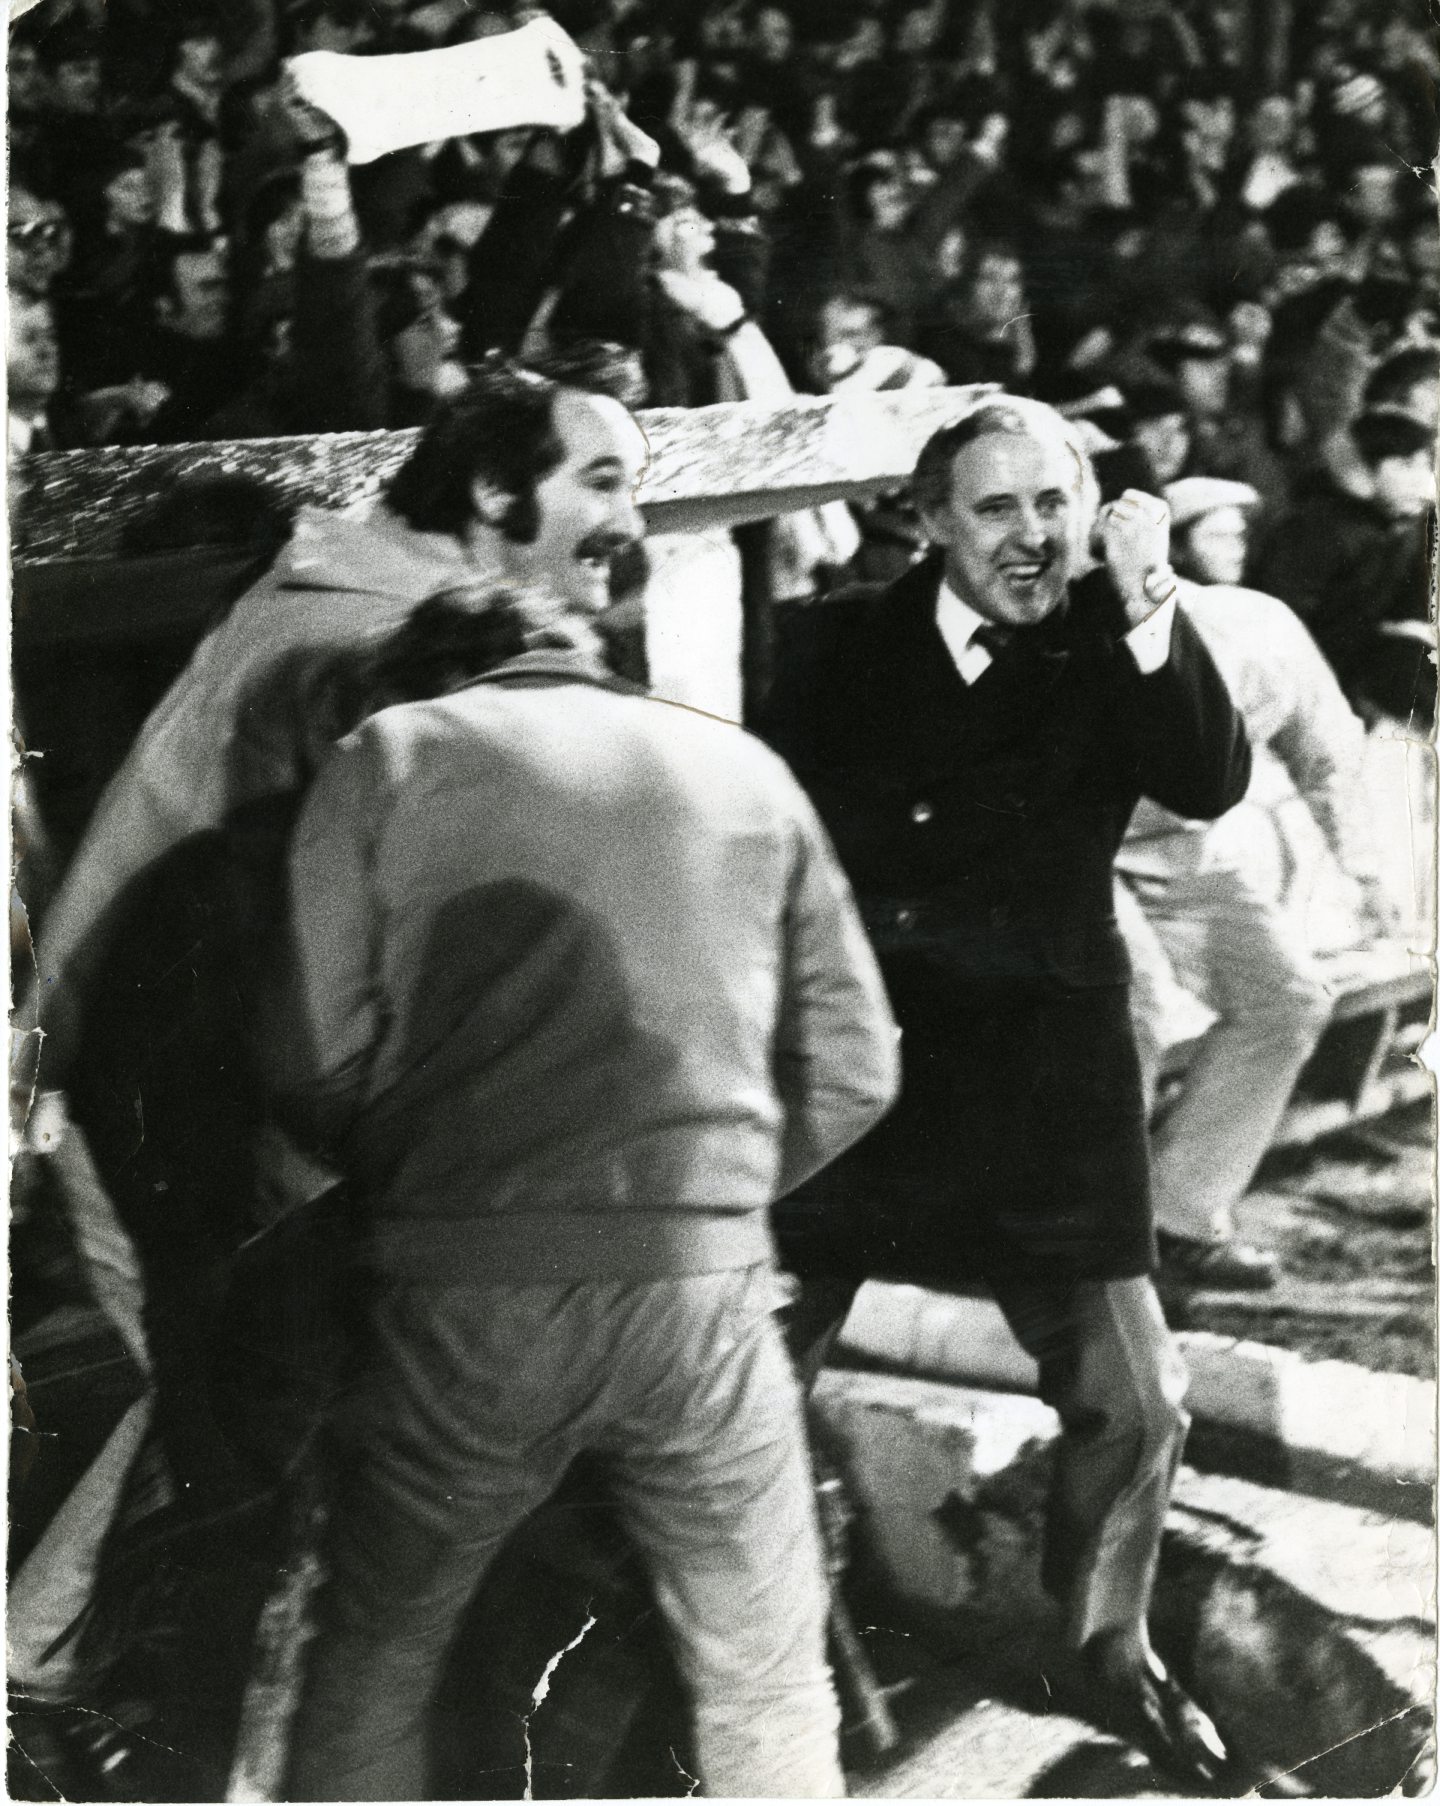 Jim McLean celebrates after the final whistle at the League Cup final between Dundee United and Aberdeen in 1979.